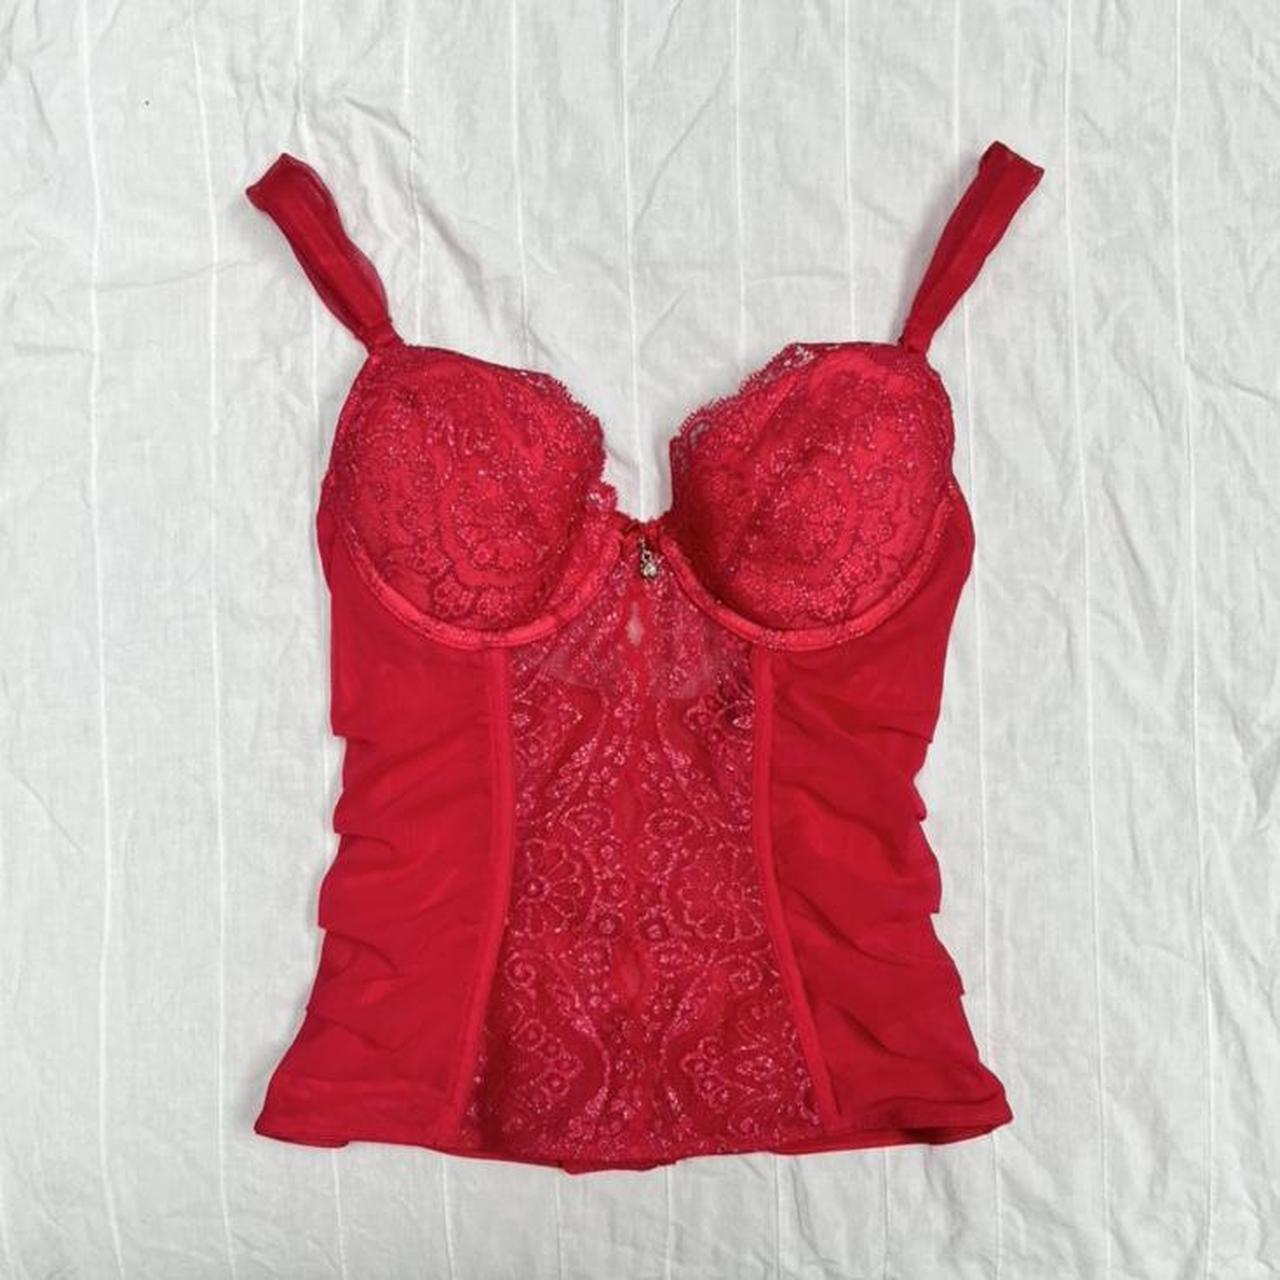 2000s Cherry red bustier top , Lighter and with more